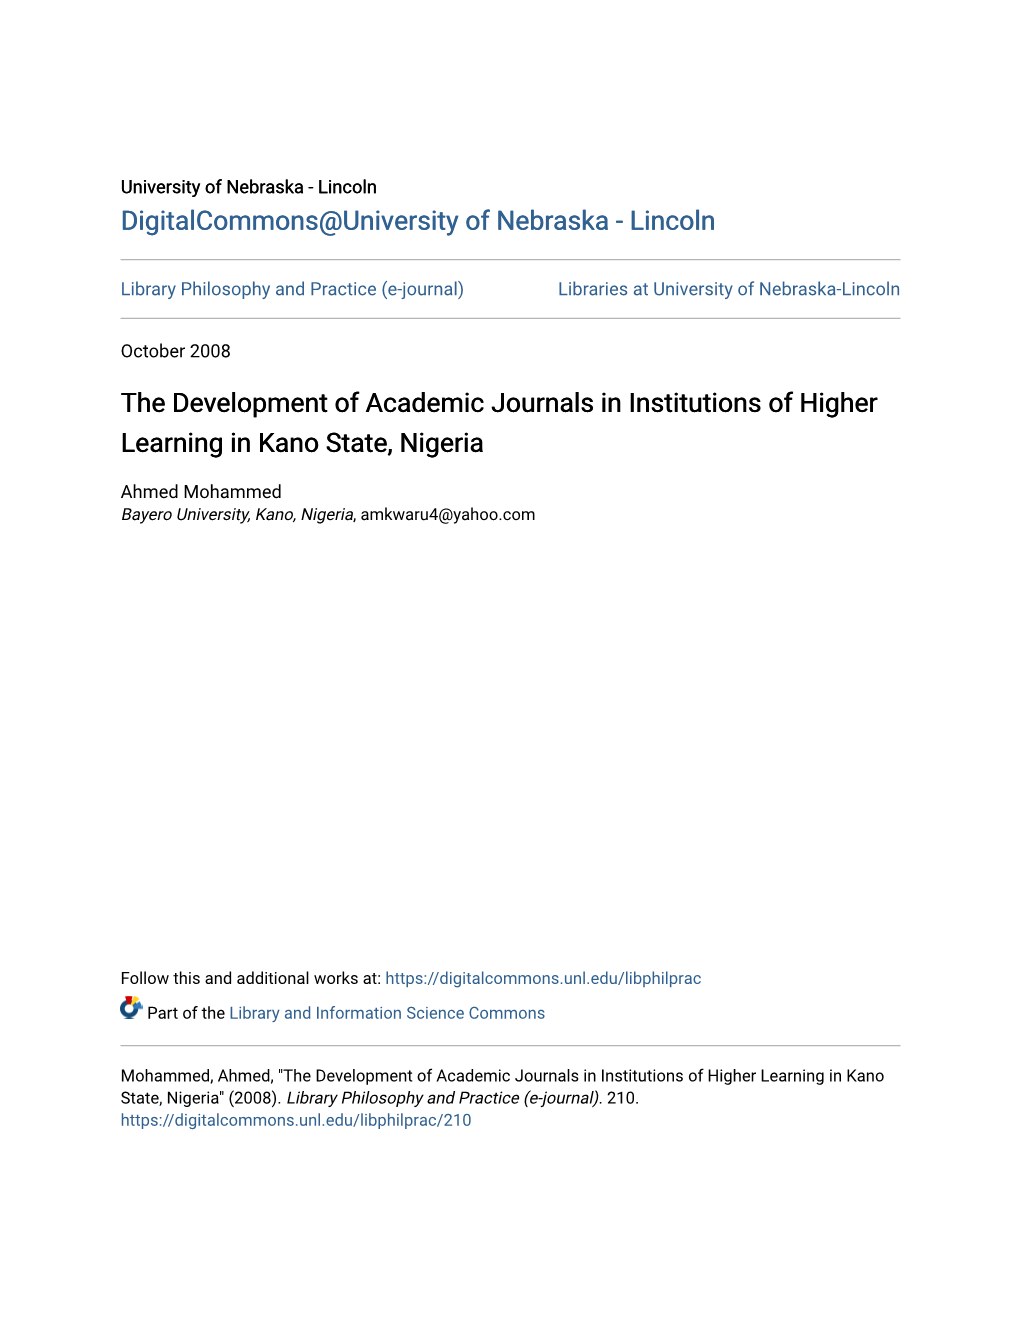 The Development of Academic Journals in Institutions of Higher Learning in Kano State, Nigeria